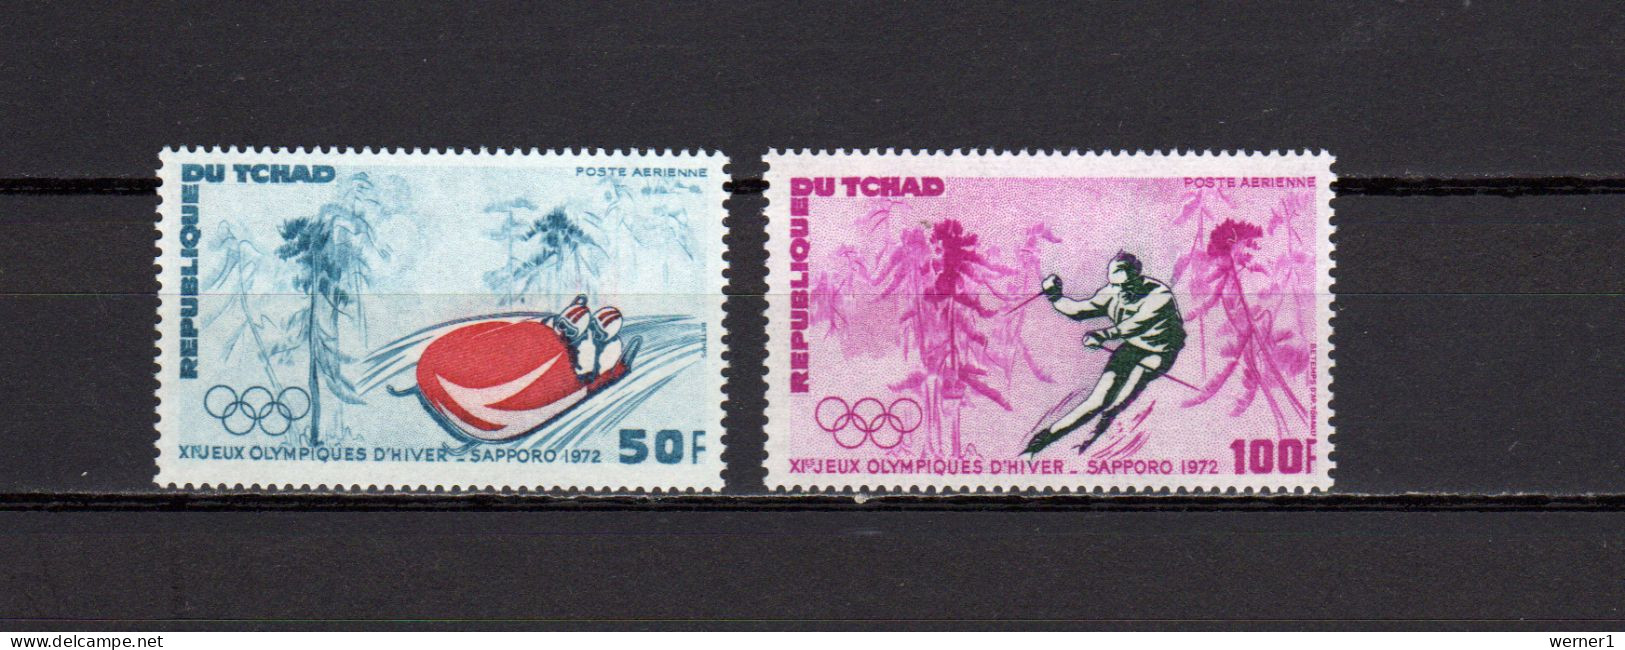 Chad - Tchad 1972 Olympic Games Sapporo Set Of 2 MNH - Winter 1972: Sapporo